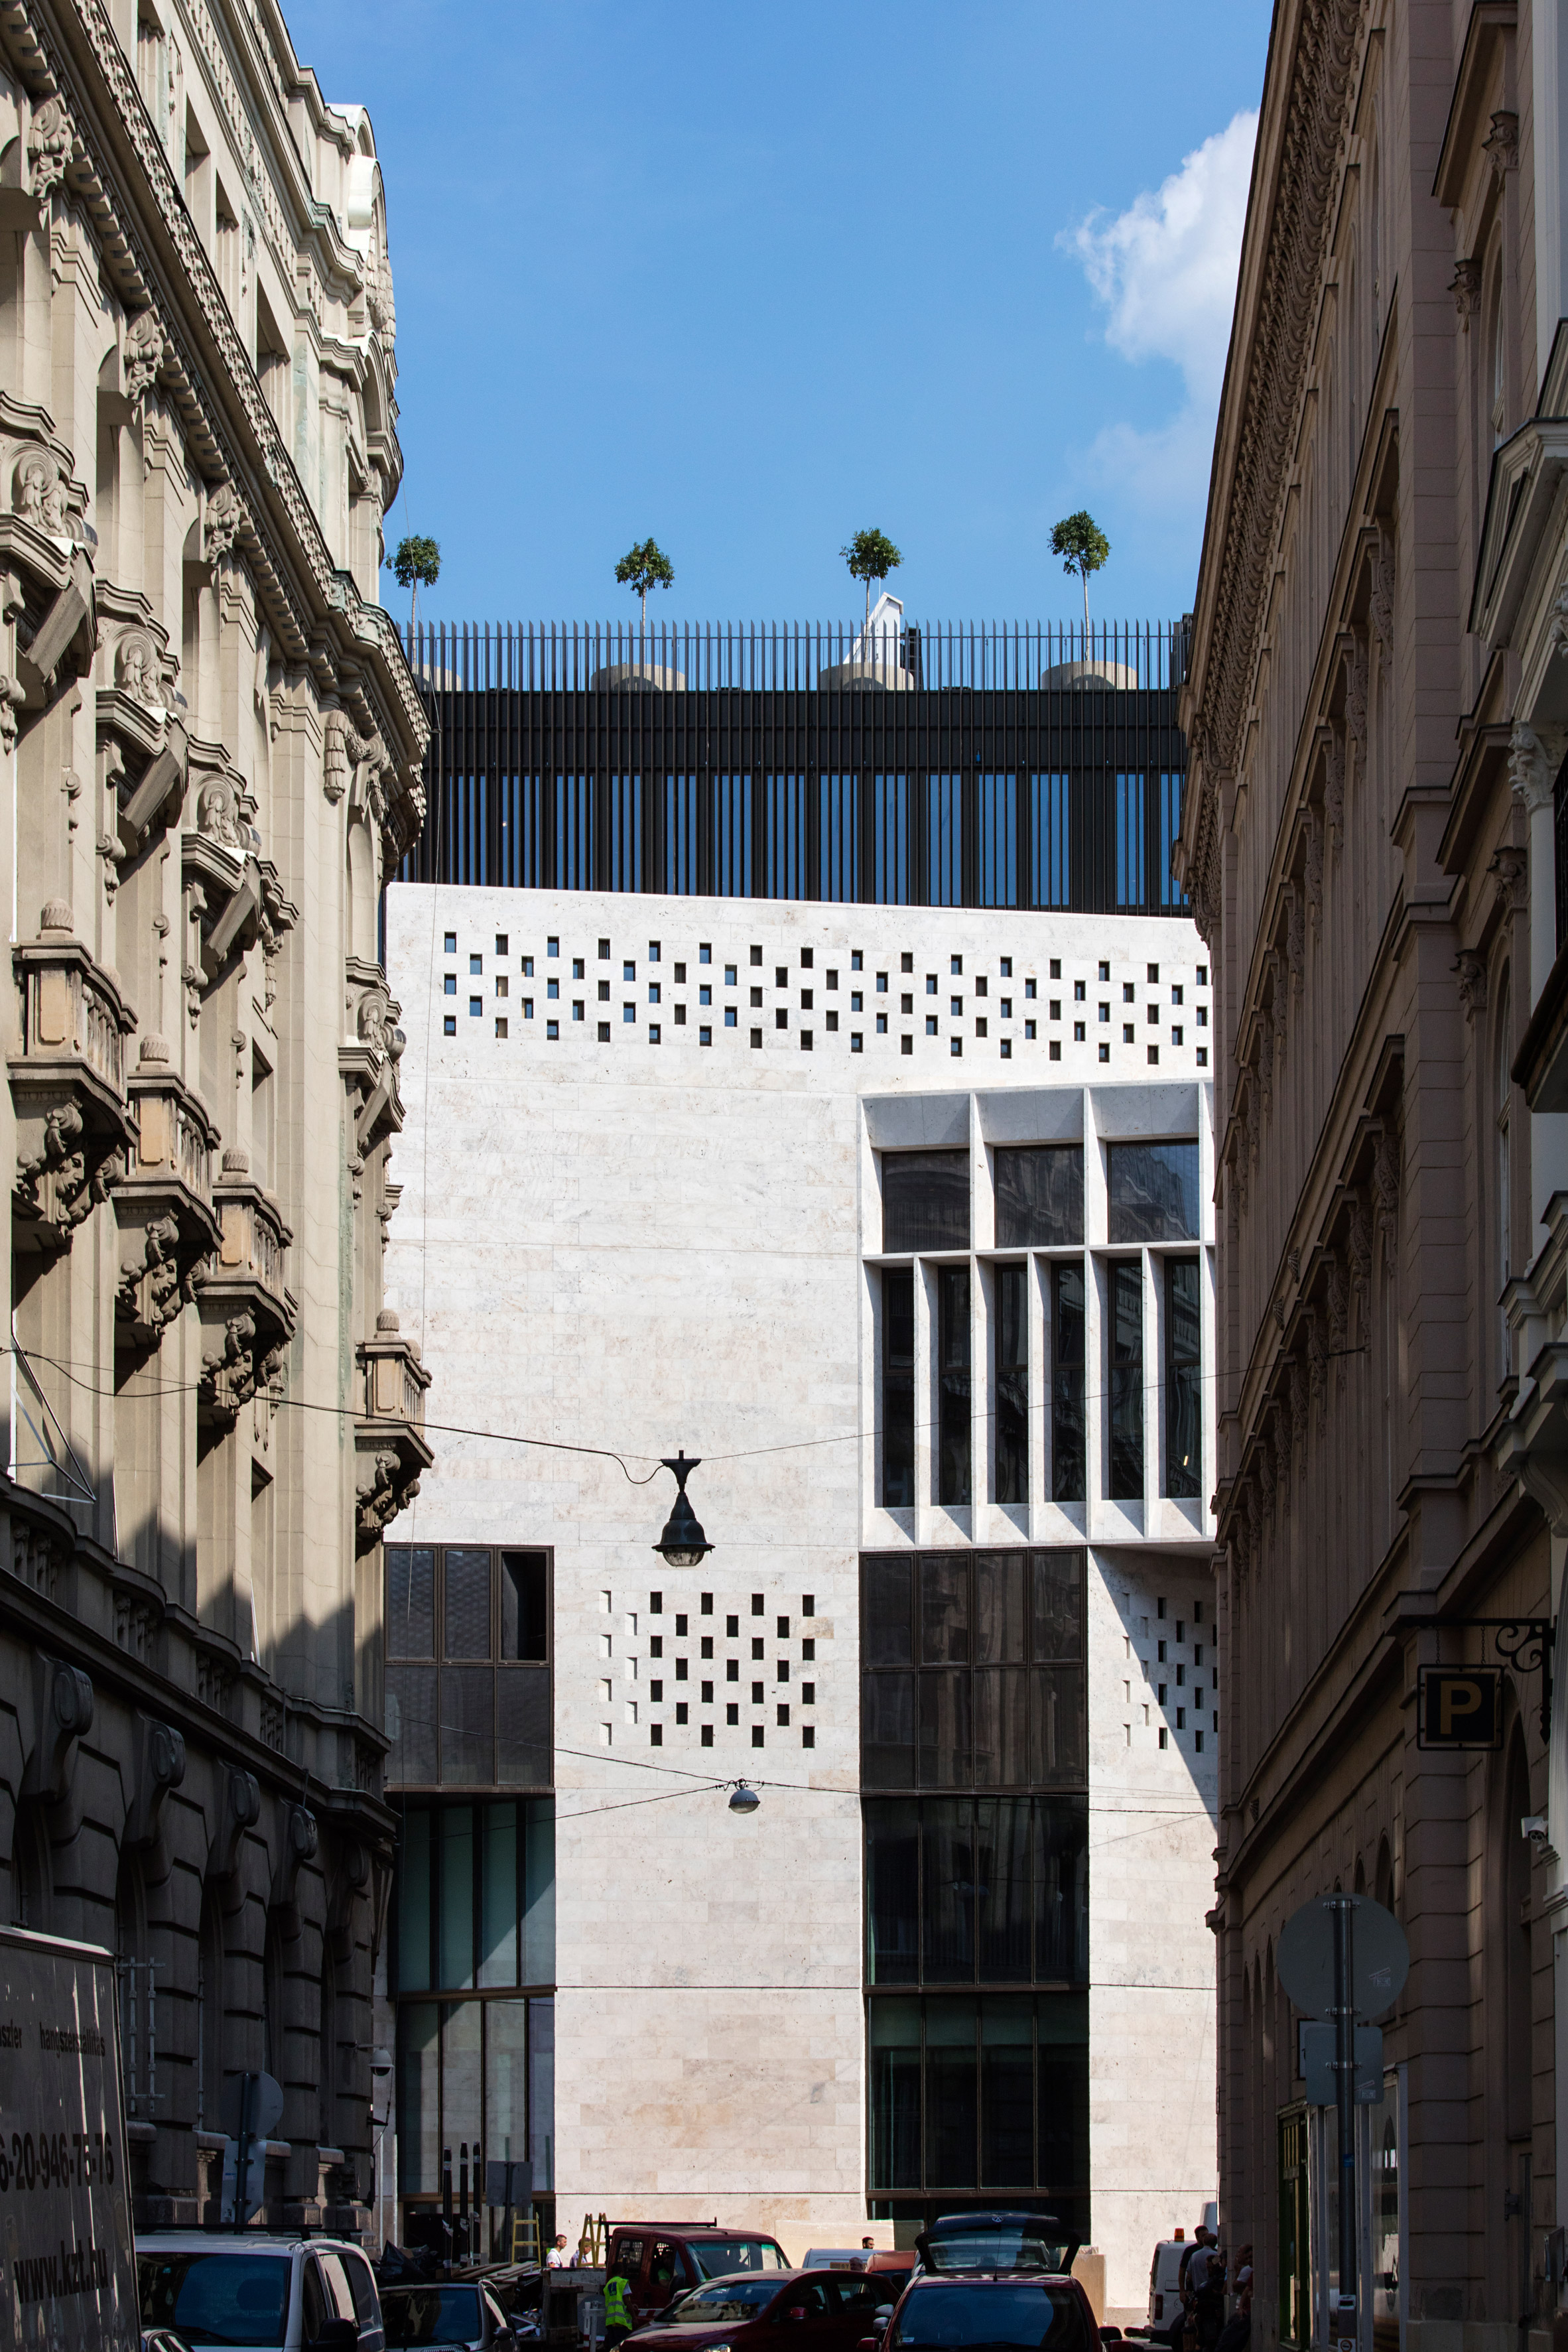 O'Donnell + Tuomey uses "surgical strategy" to link new and old buildings of Budapest university